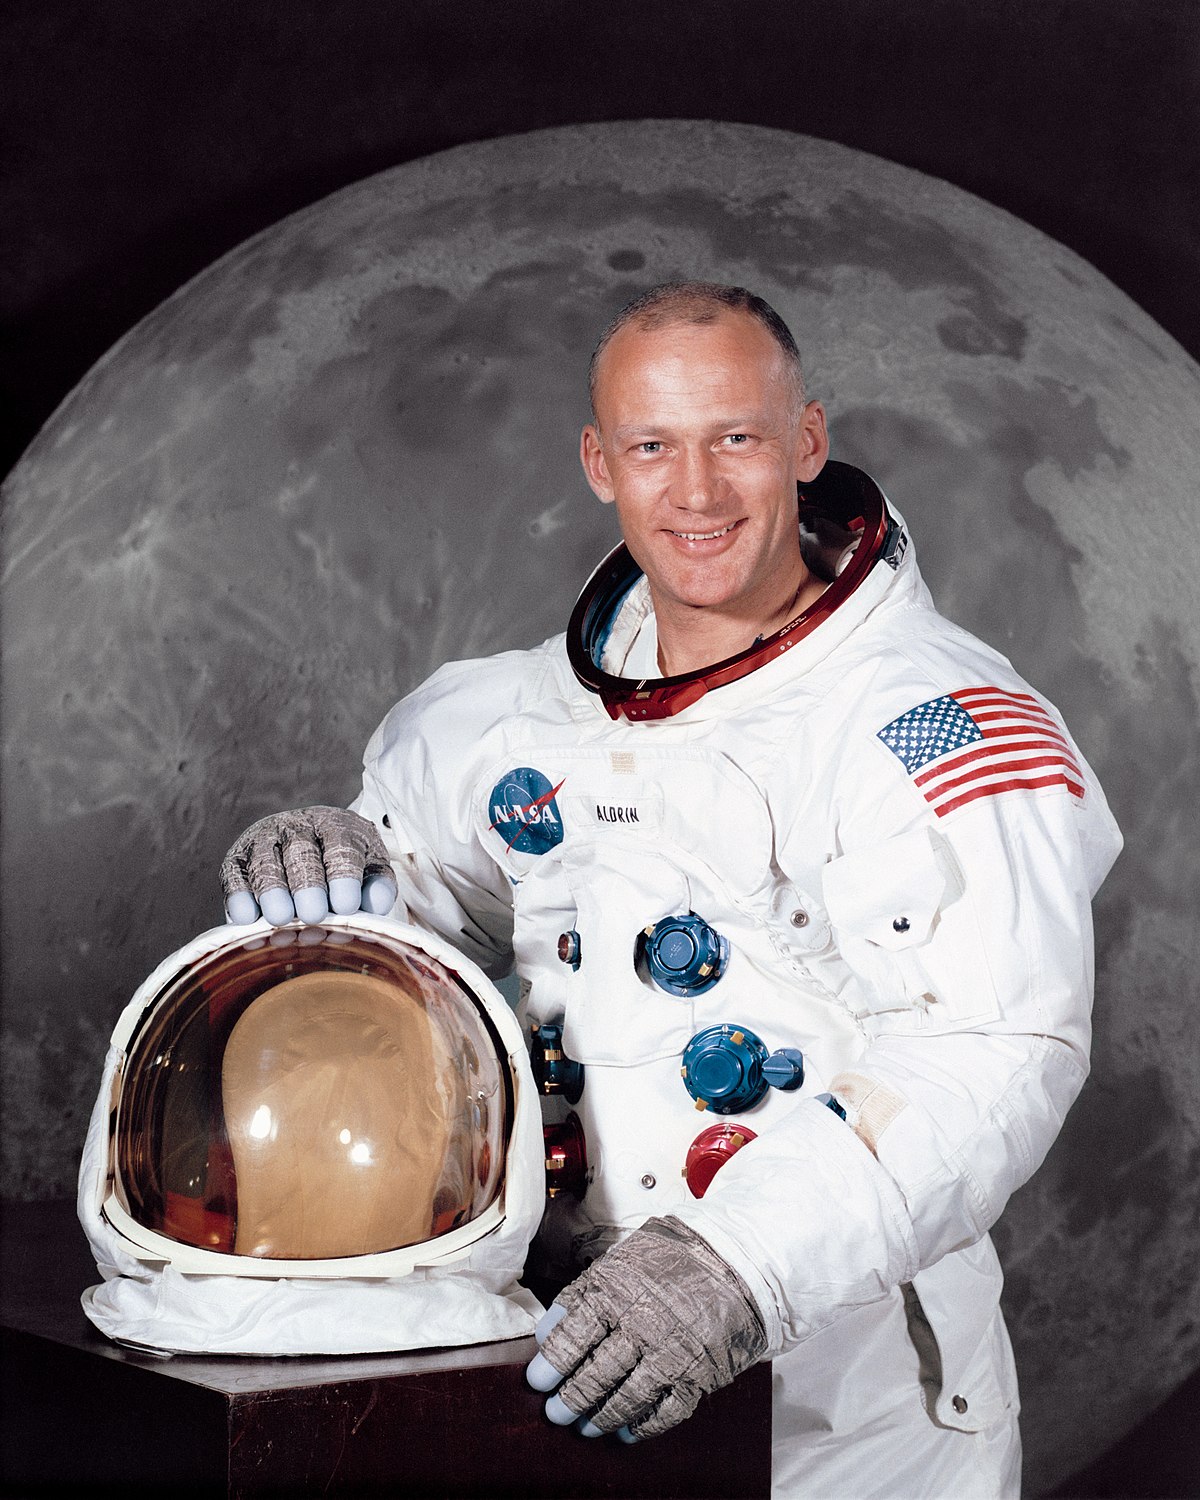 Science News Roundup: Astronaut Buzz Aldrin's Apollo 11 flight jacket fetches $2.8 million; China closely tracking debris of its most powerful rocket and more